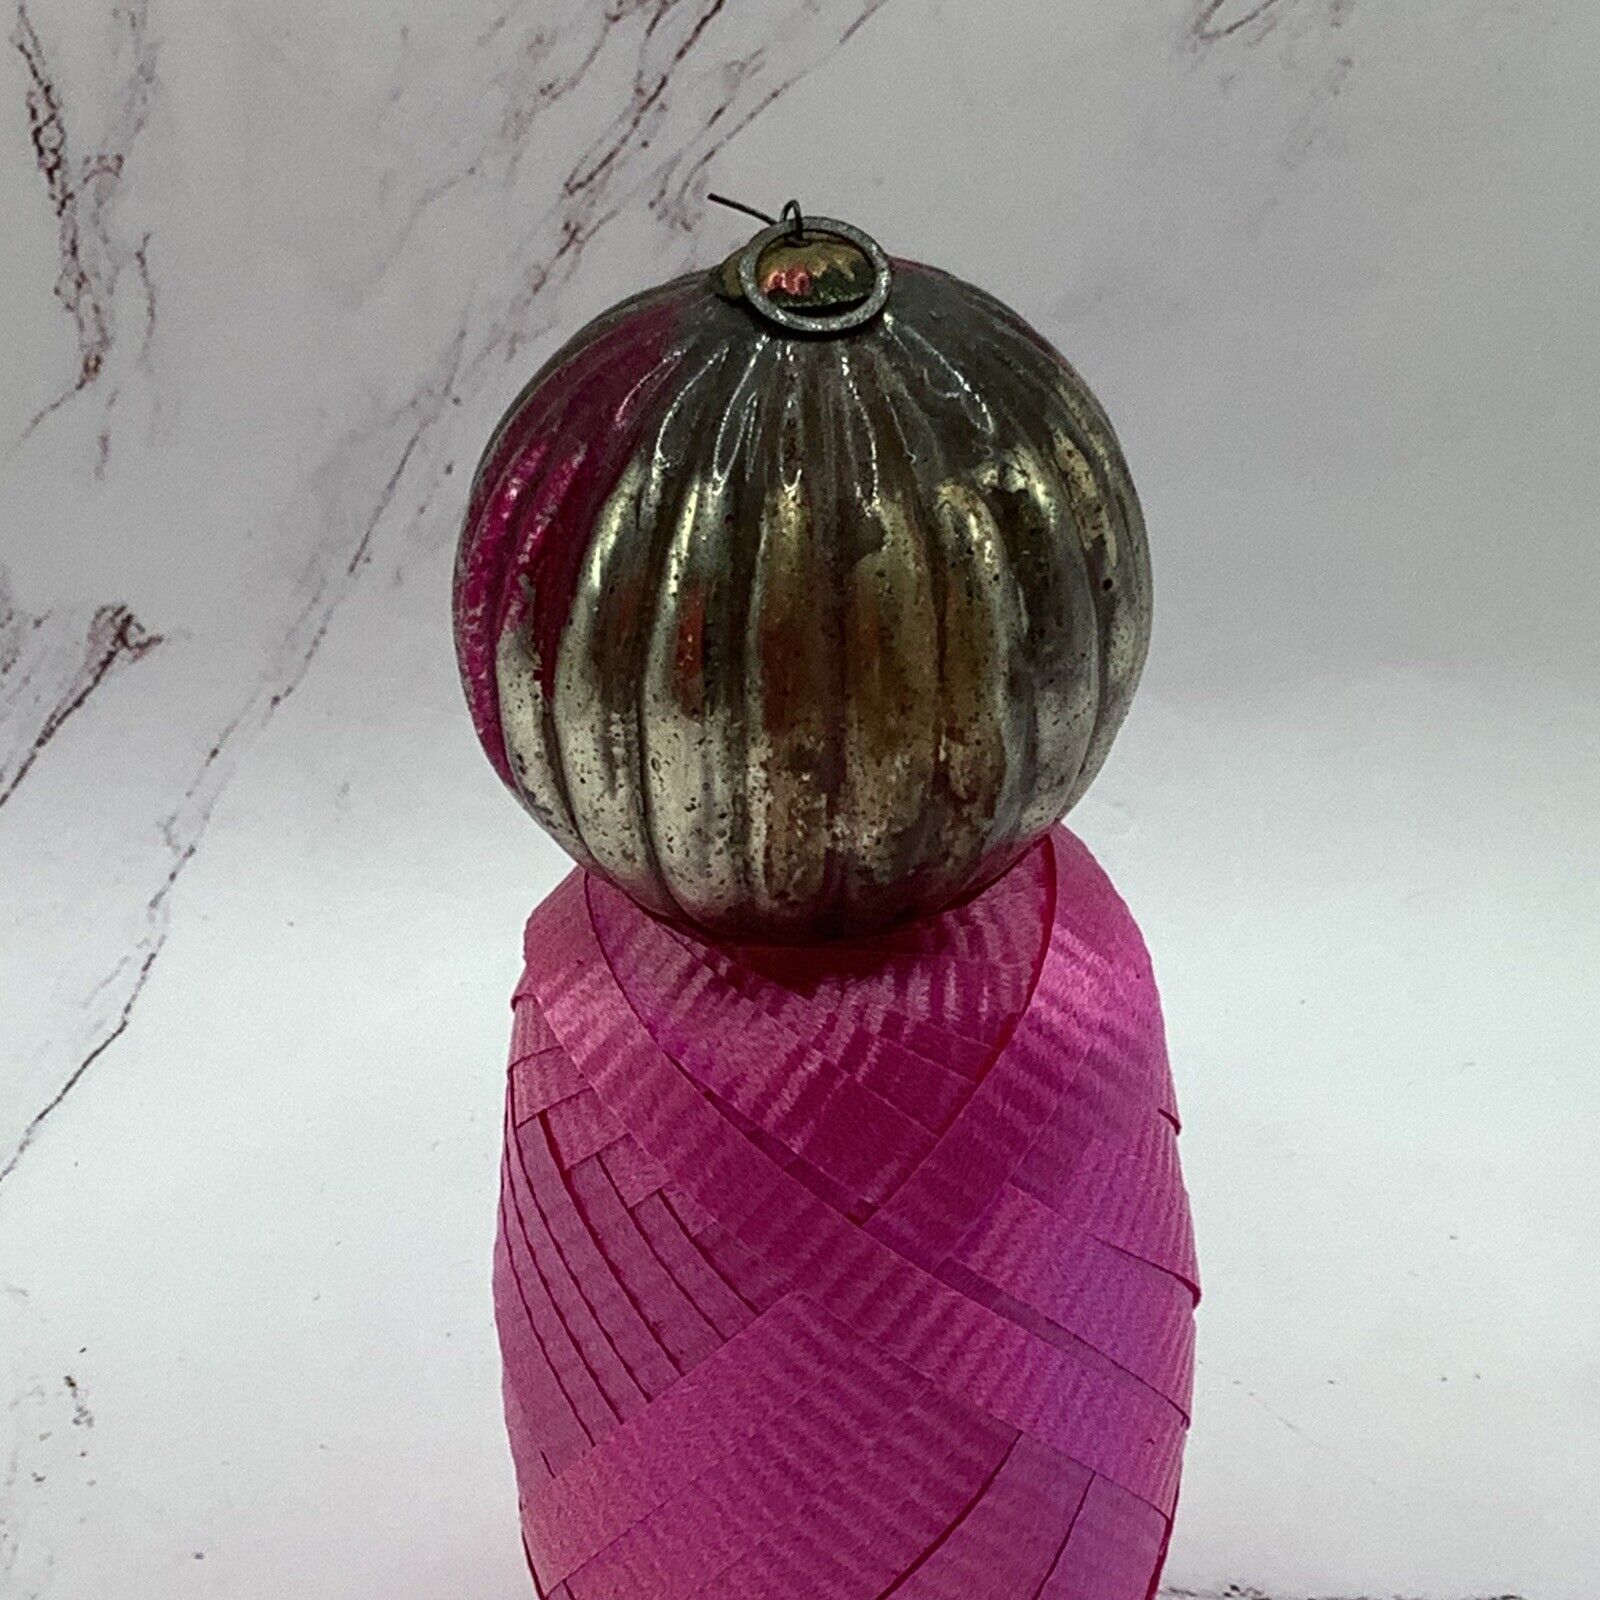 Antique Mercury Glass Pumpkin Ornament. Made In Germany Early 1900s